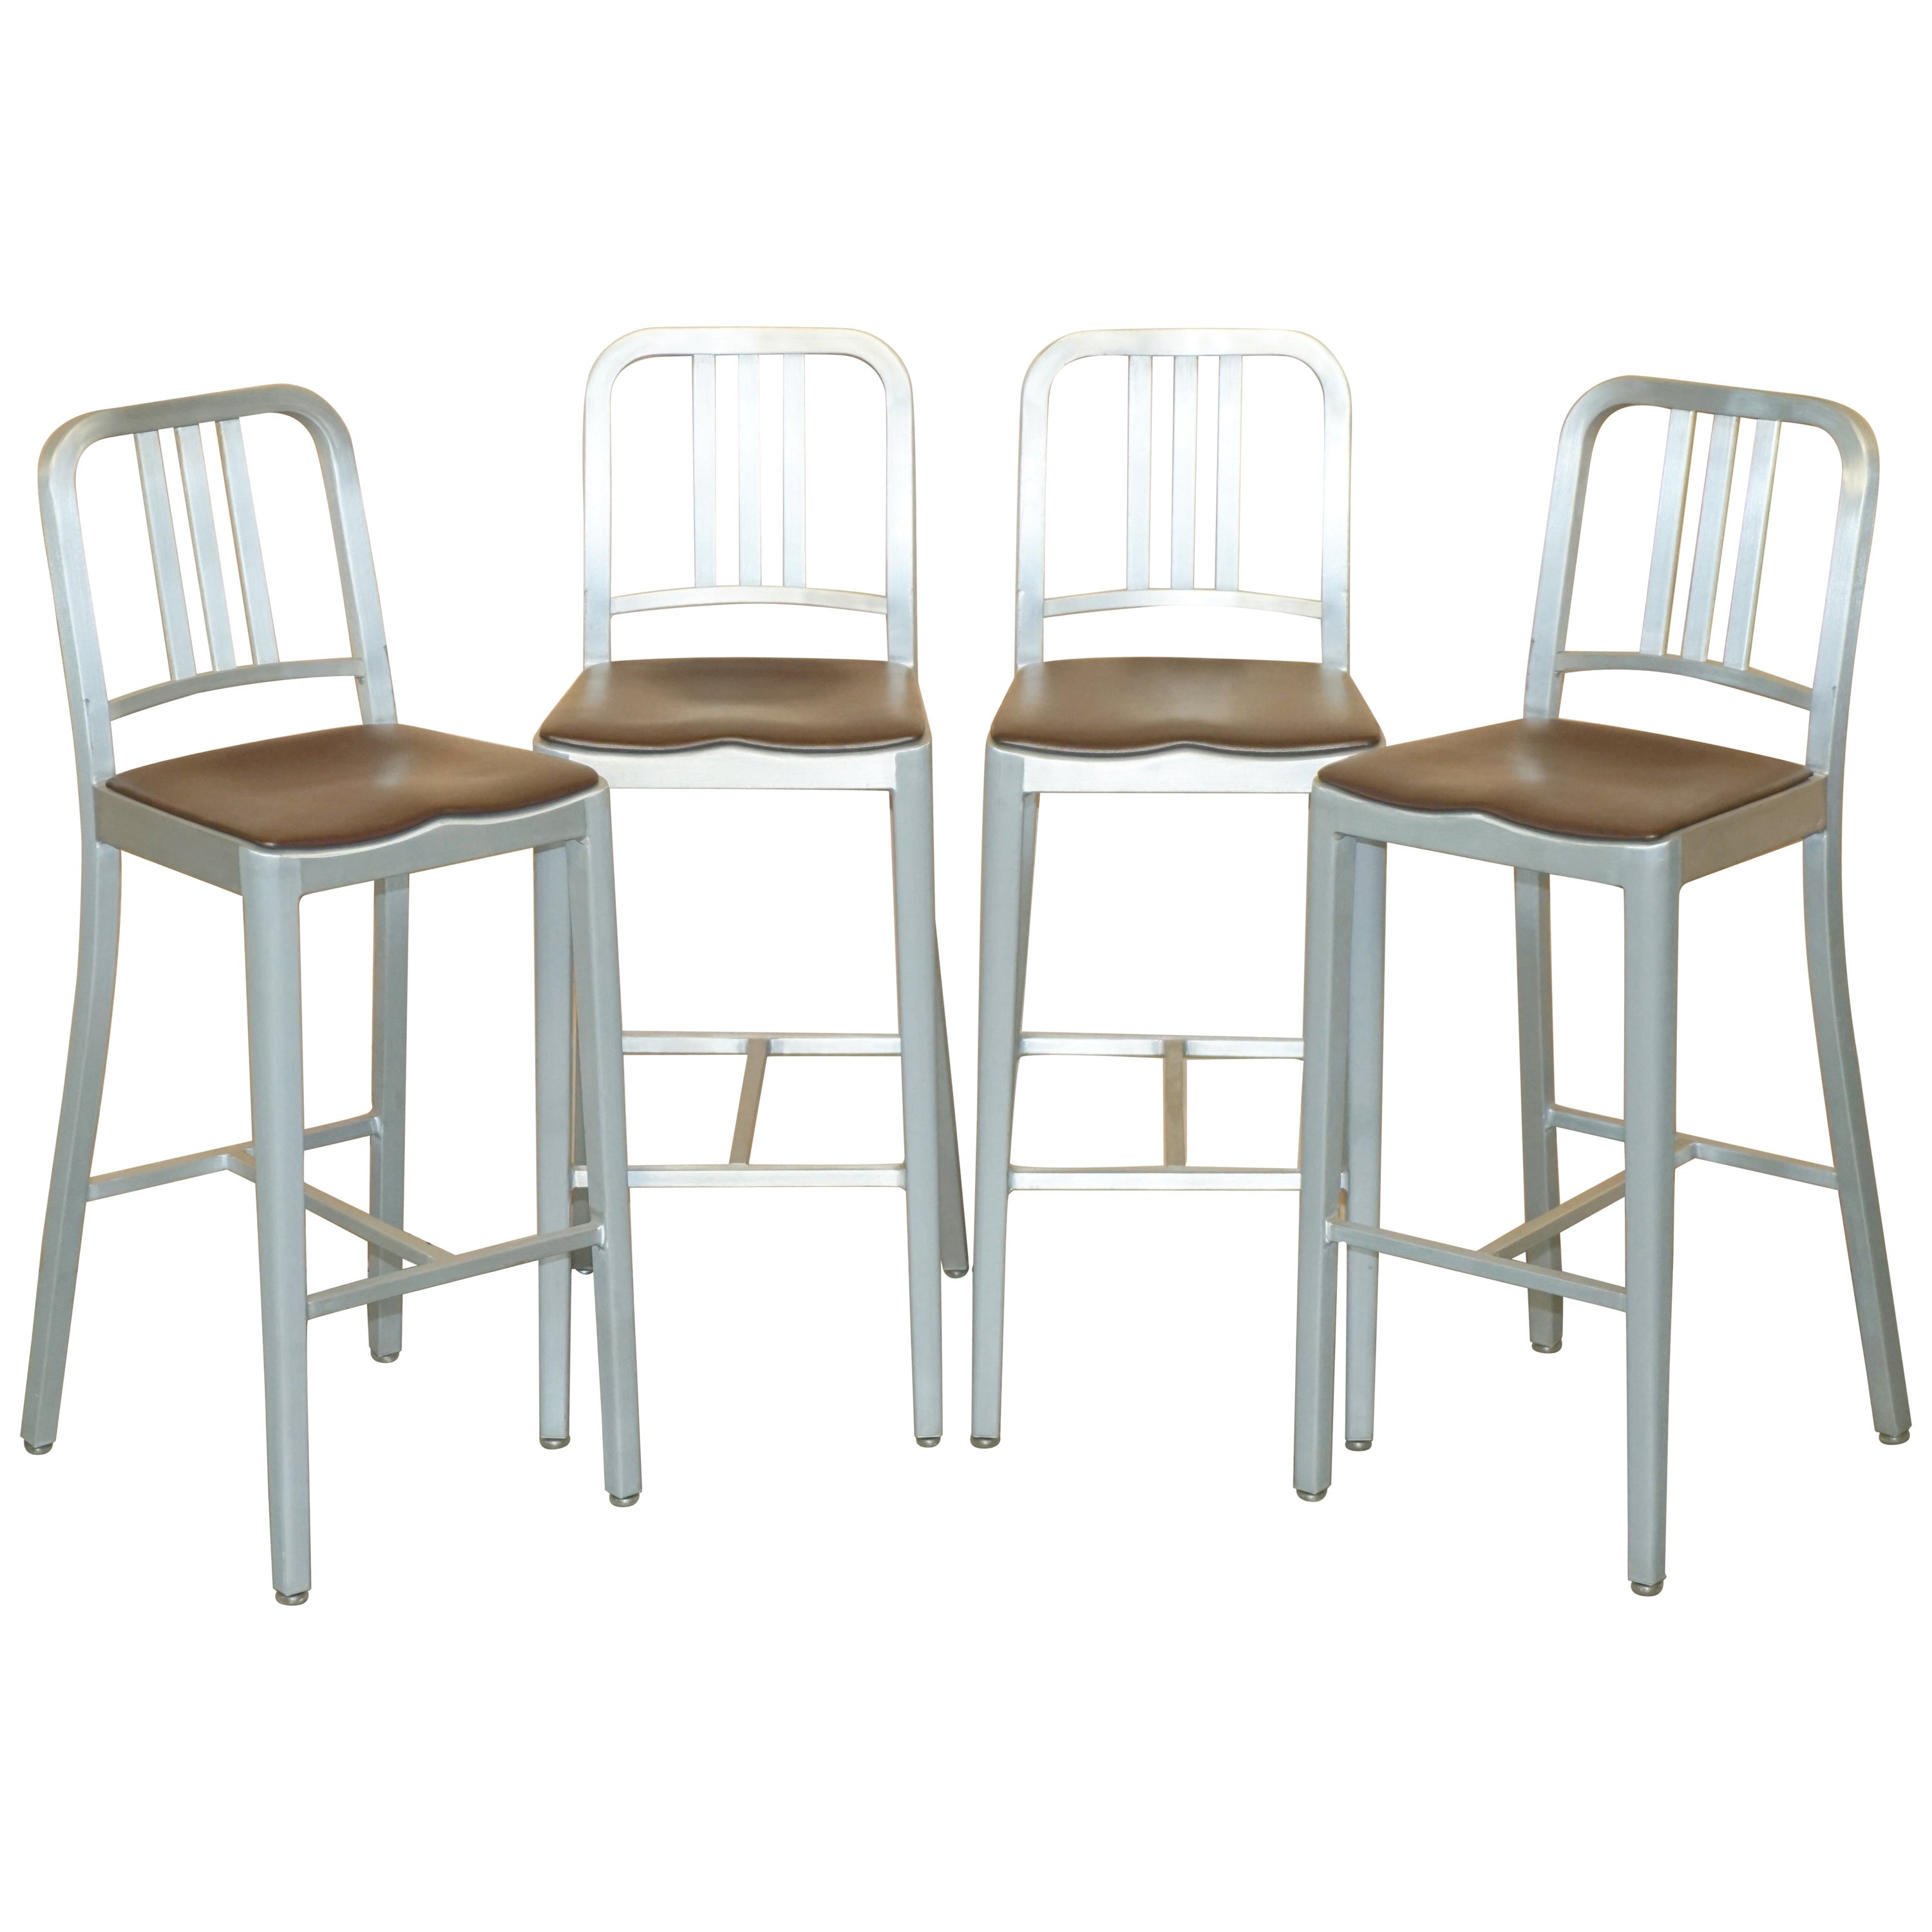 FOUR COLLECTABLE ViNTAGE EMECO 111 BRUSHED ALUMINIUM COUNTER BAR STOOLS For Sale